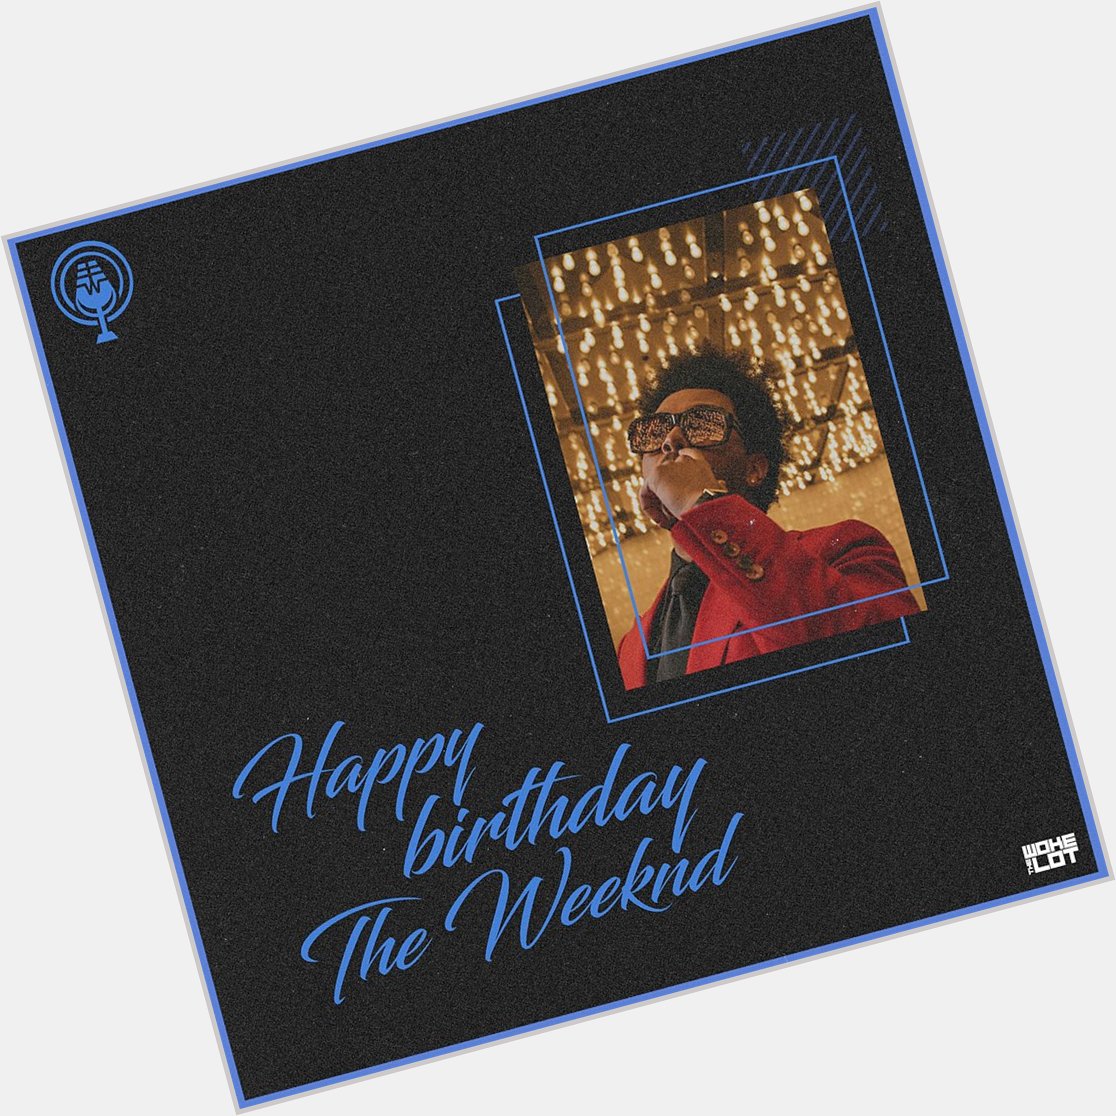 Happy birthday to The Weeknd. 